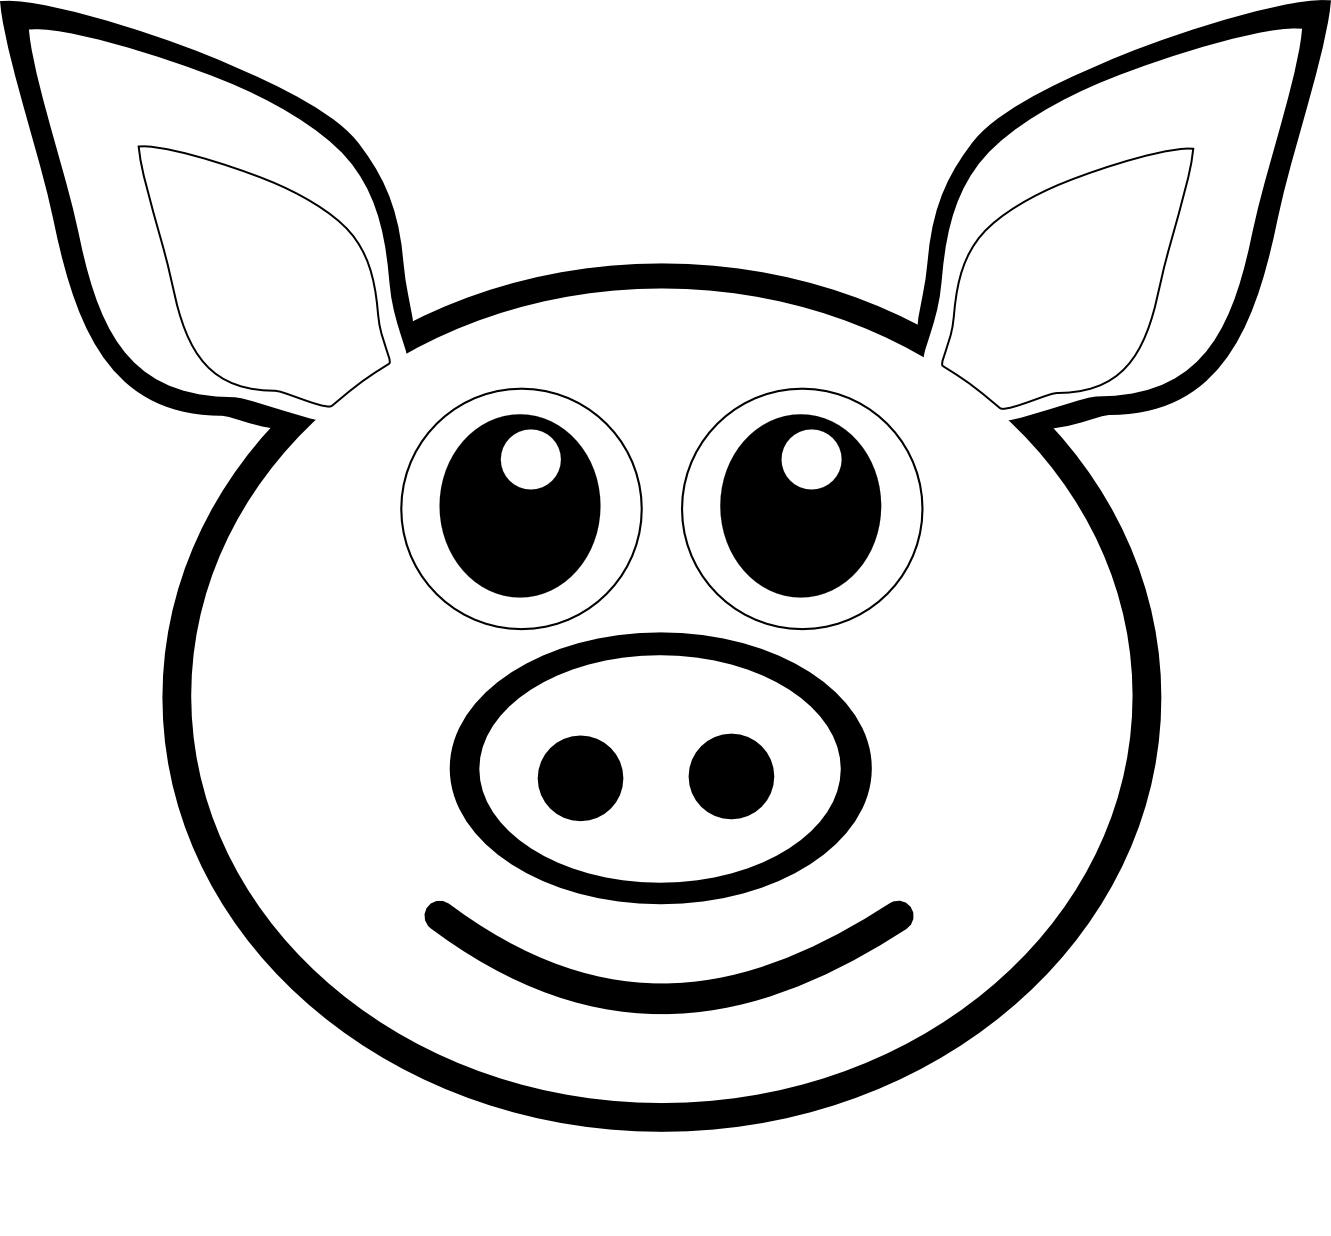 Black And White Cartoon Pig - Clipart library